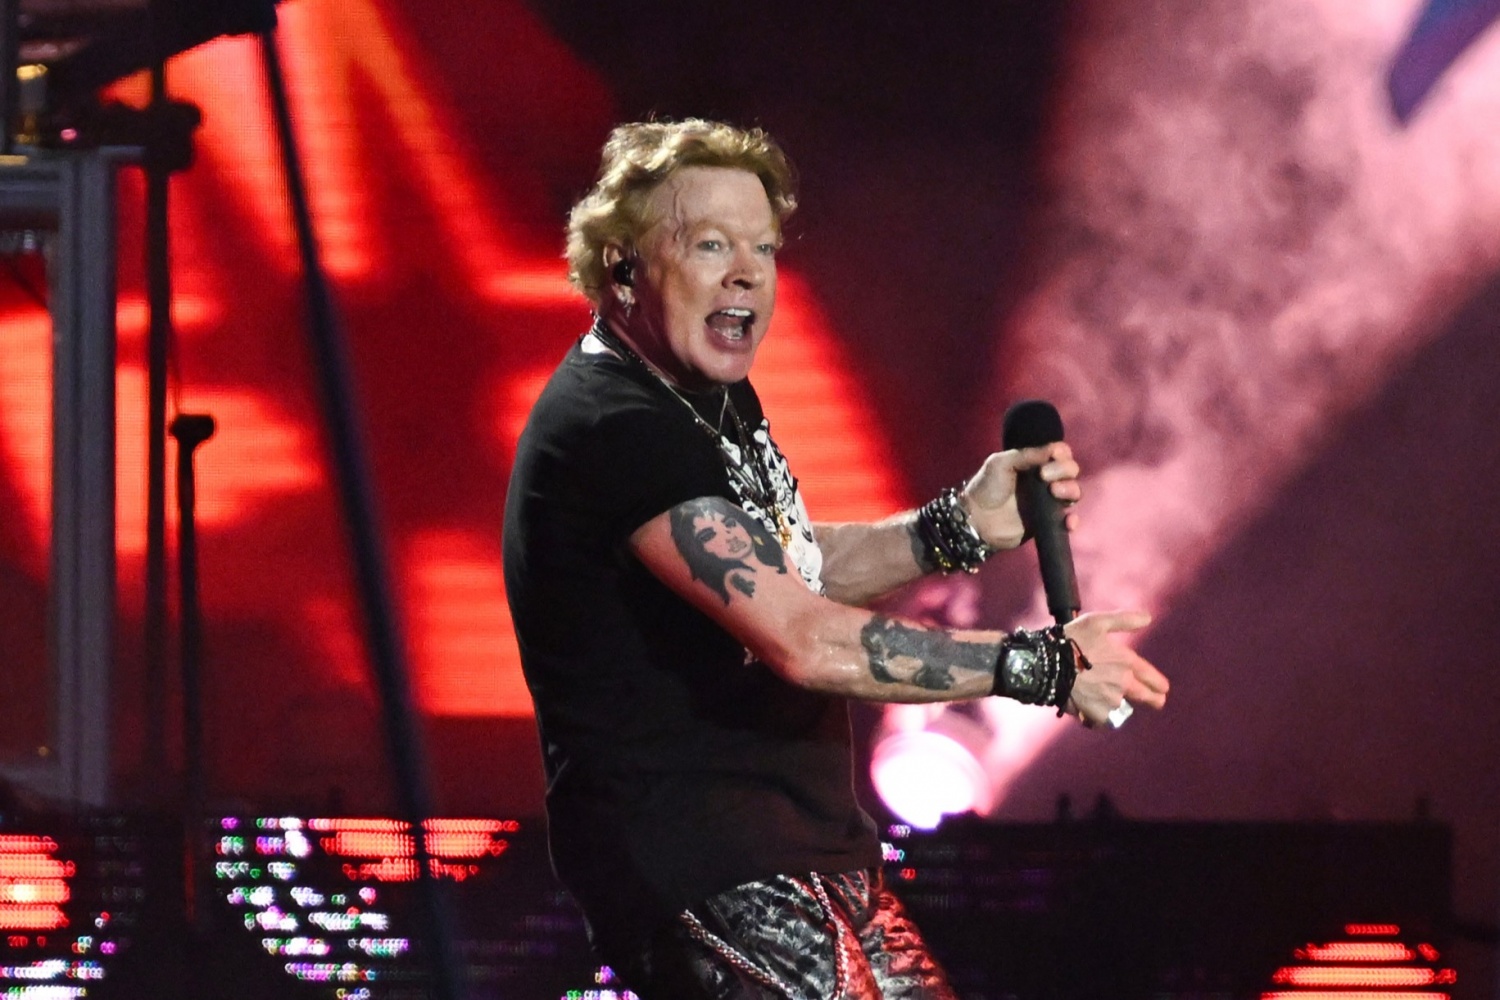 Axl Rose Falls on Stage During Guns N' Roses London Concert — Video Goes Viral